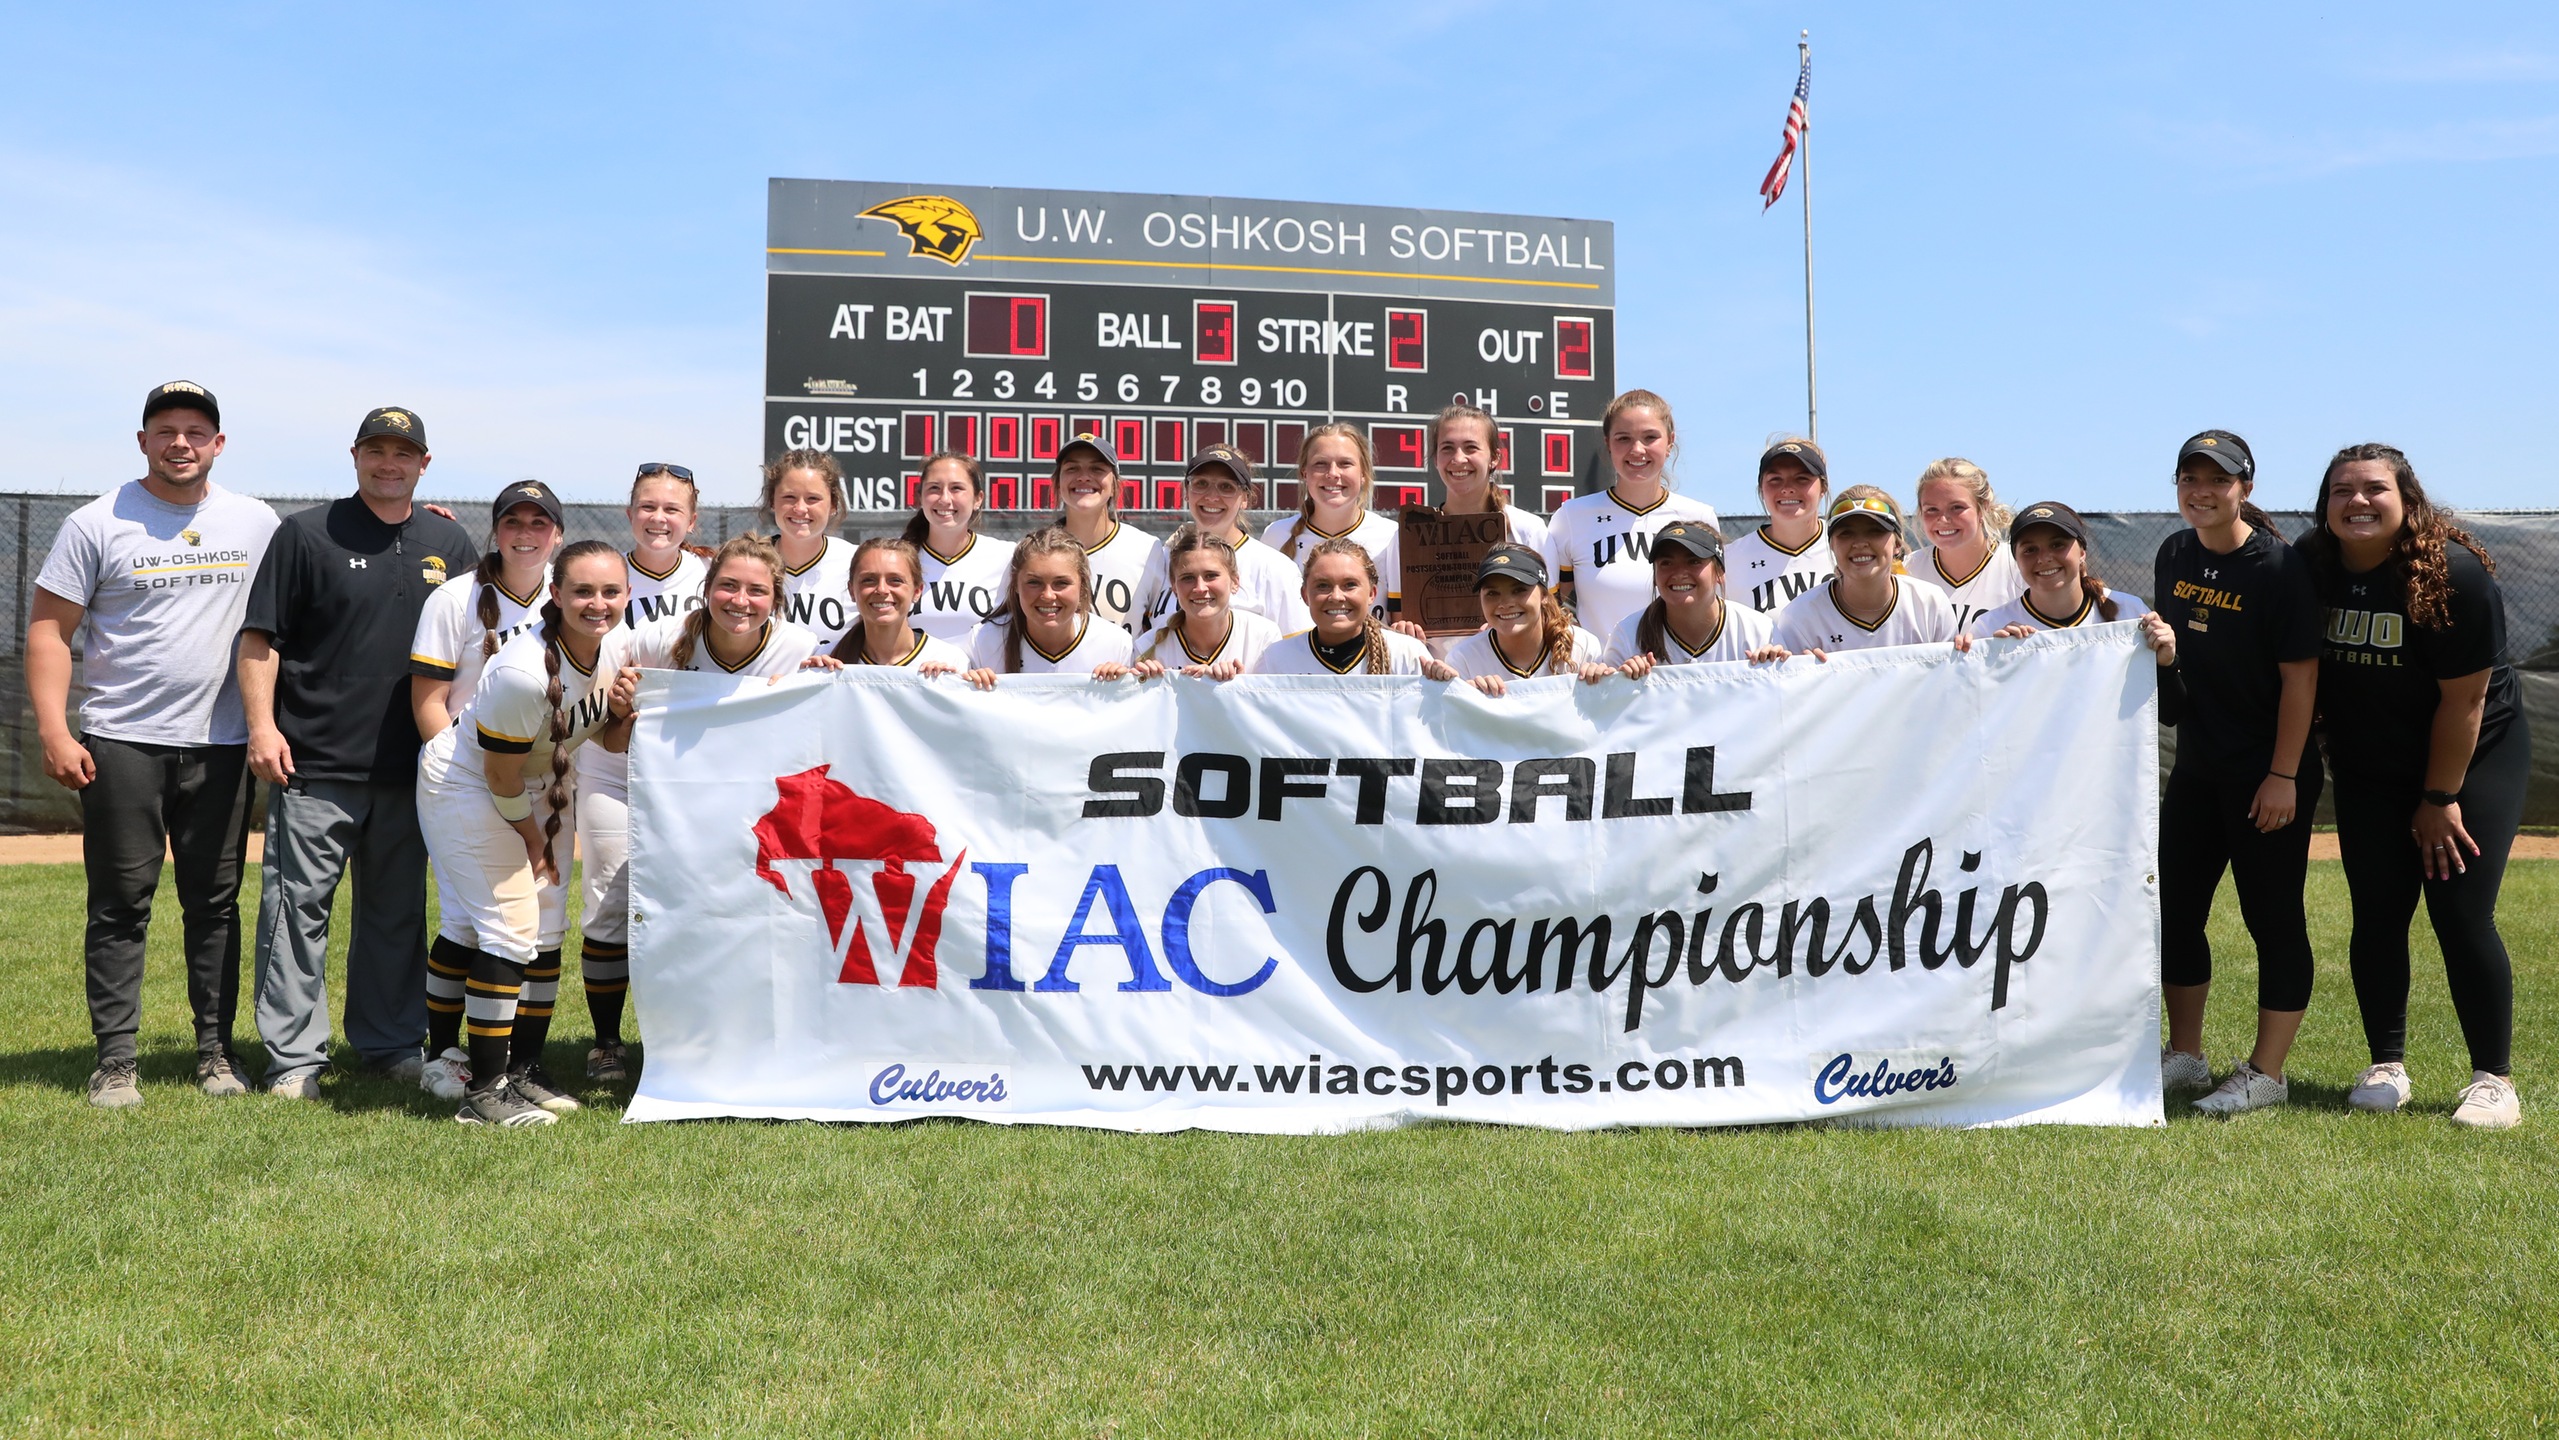 The Titans won their second WIAC postseason championship and first since 2008.